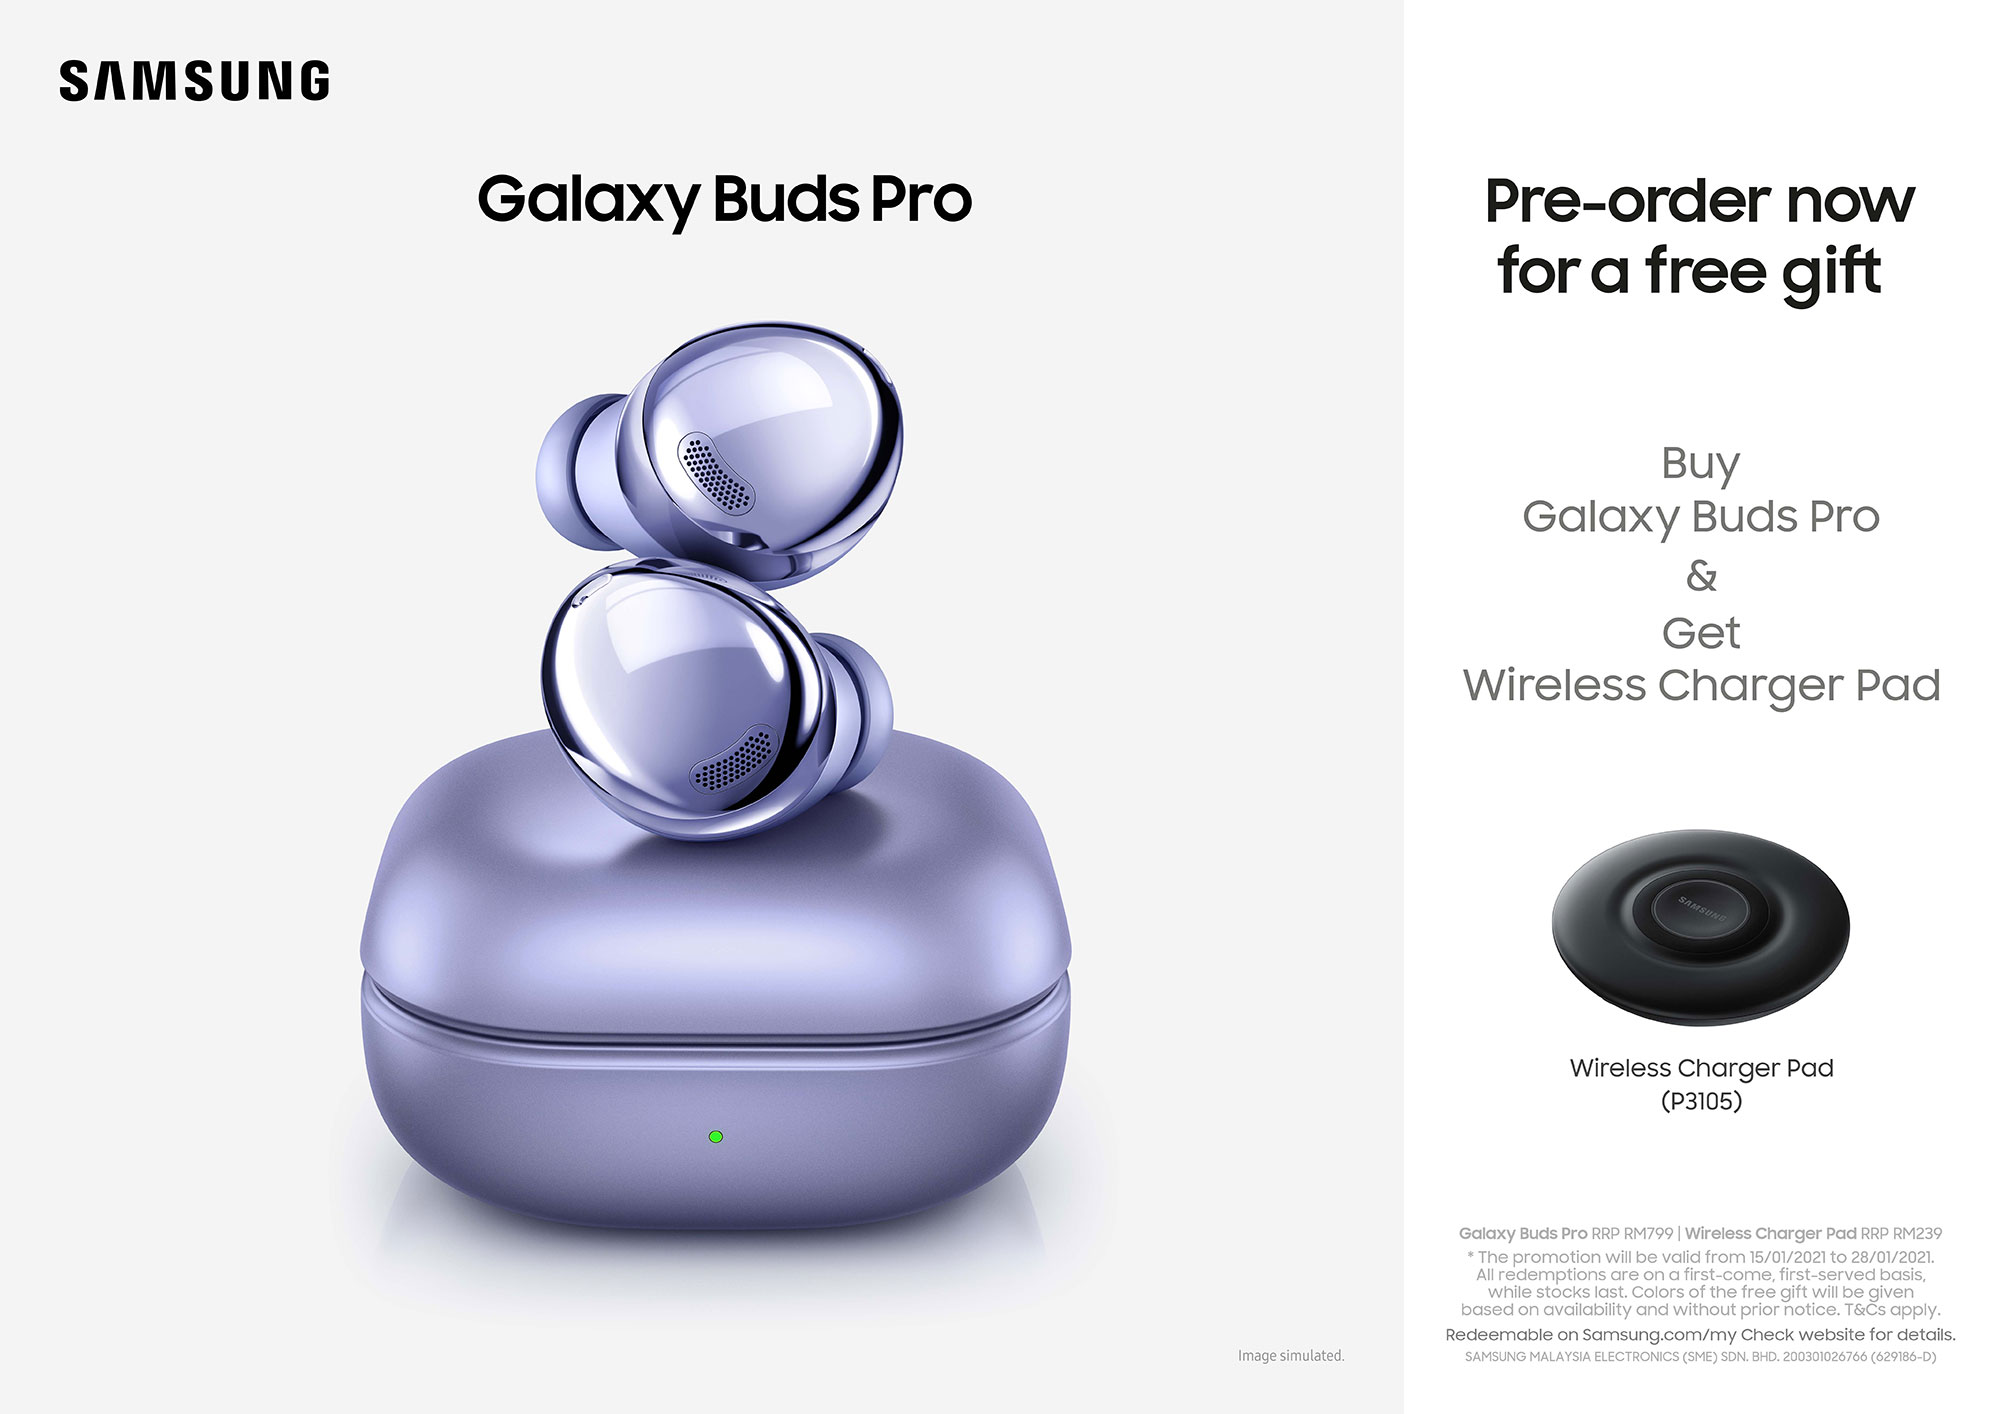 Samsung Galaxy Buds Pro Now Available for Pre-Order